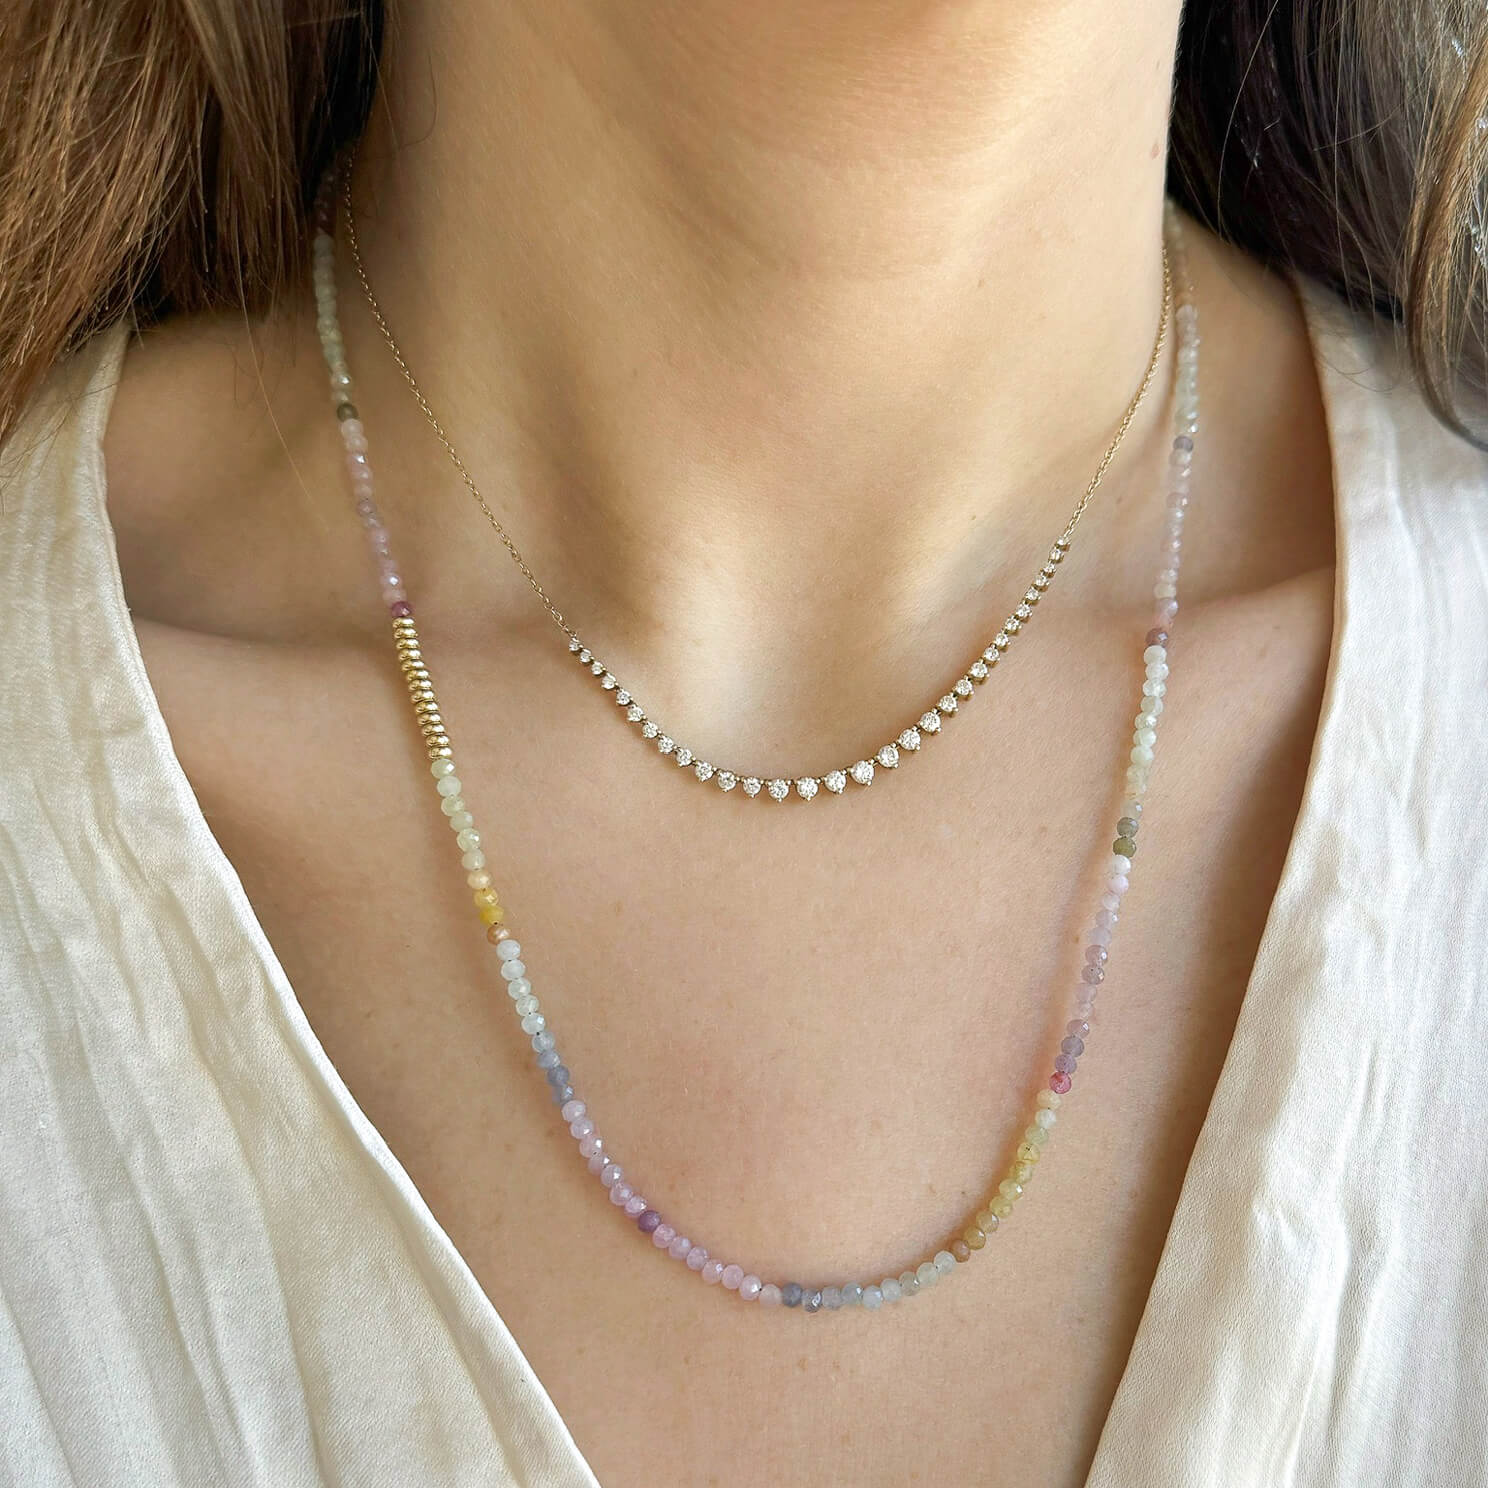 Ombré Sapphire Birthstone Bead Necklace & Triple Wrap Bracelet in 14k yellow gold styled on neck of model with graduated diamond necklace